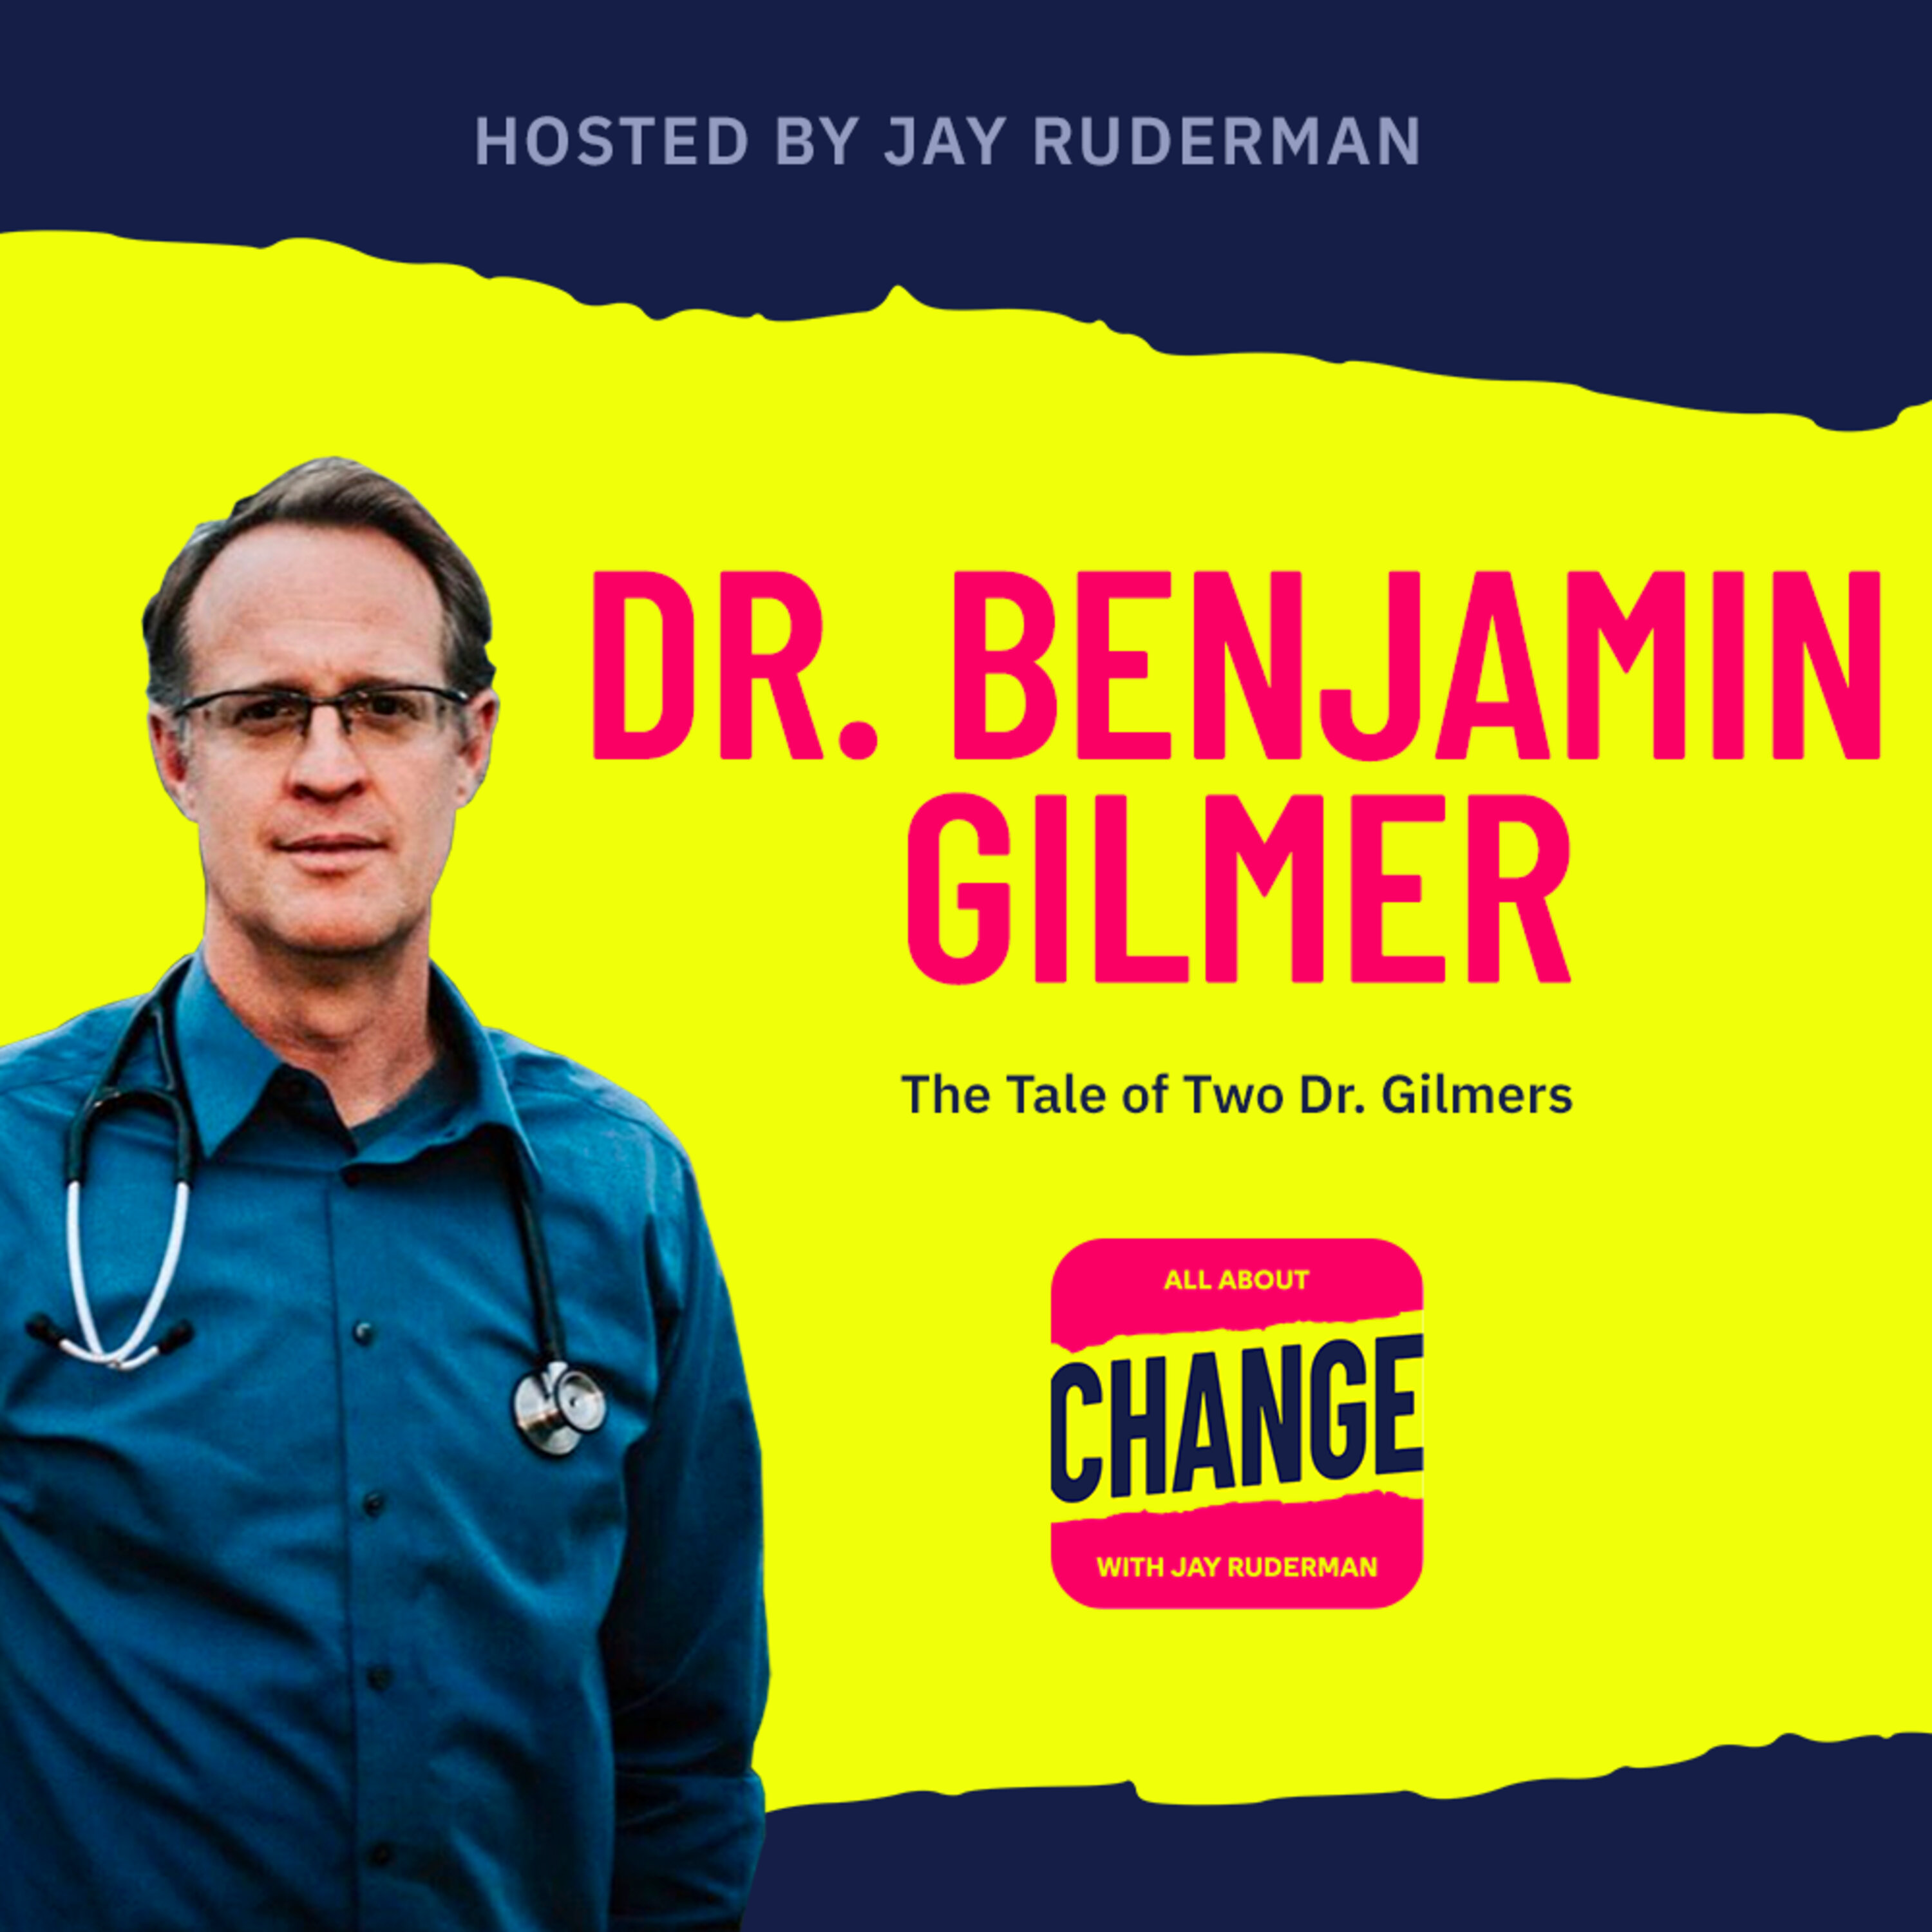 Dr. Benjamin Gilmer - The Tale of Two Gilmers